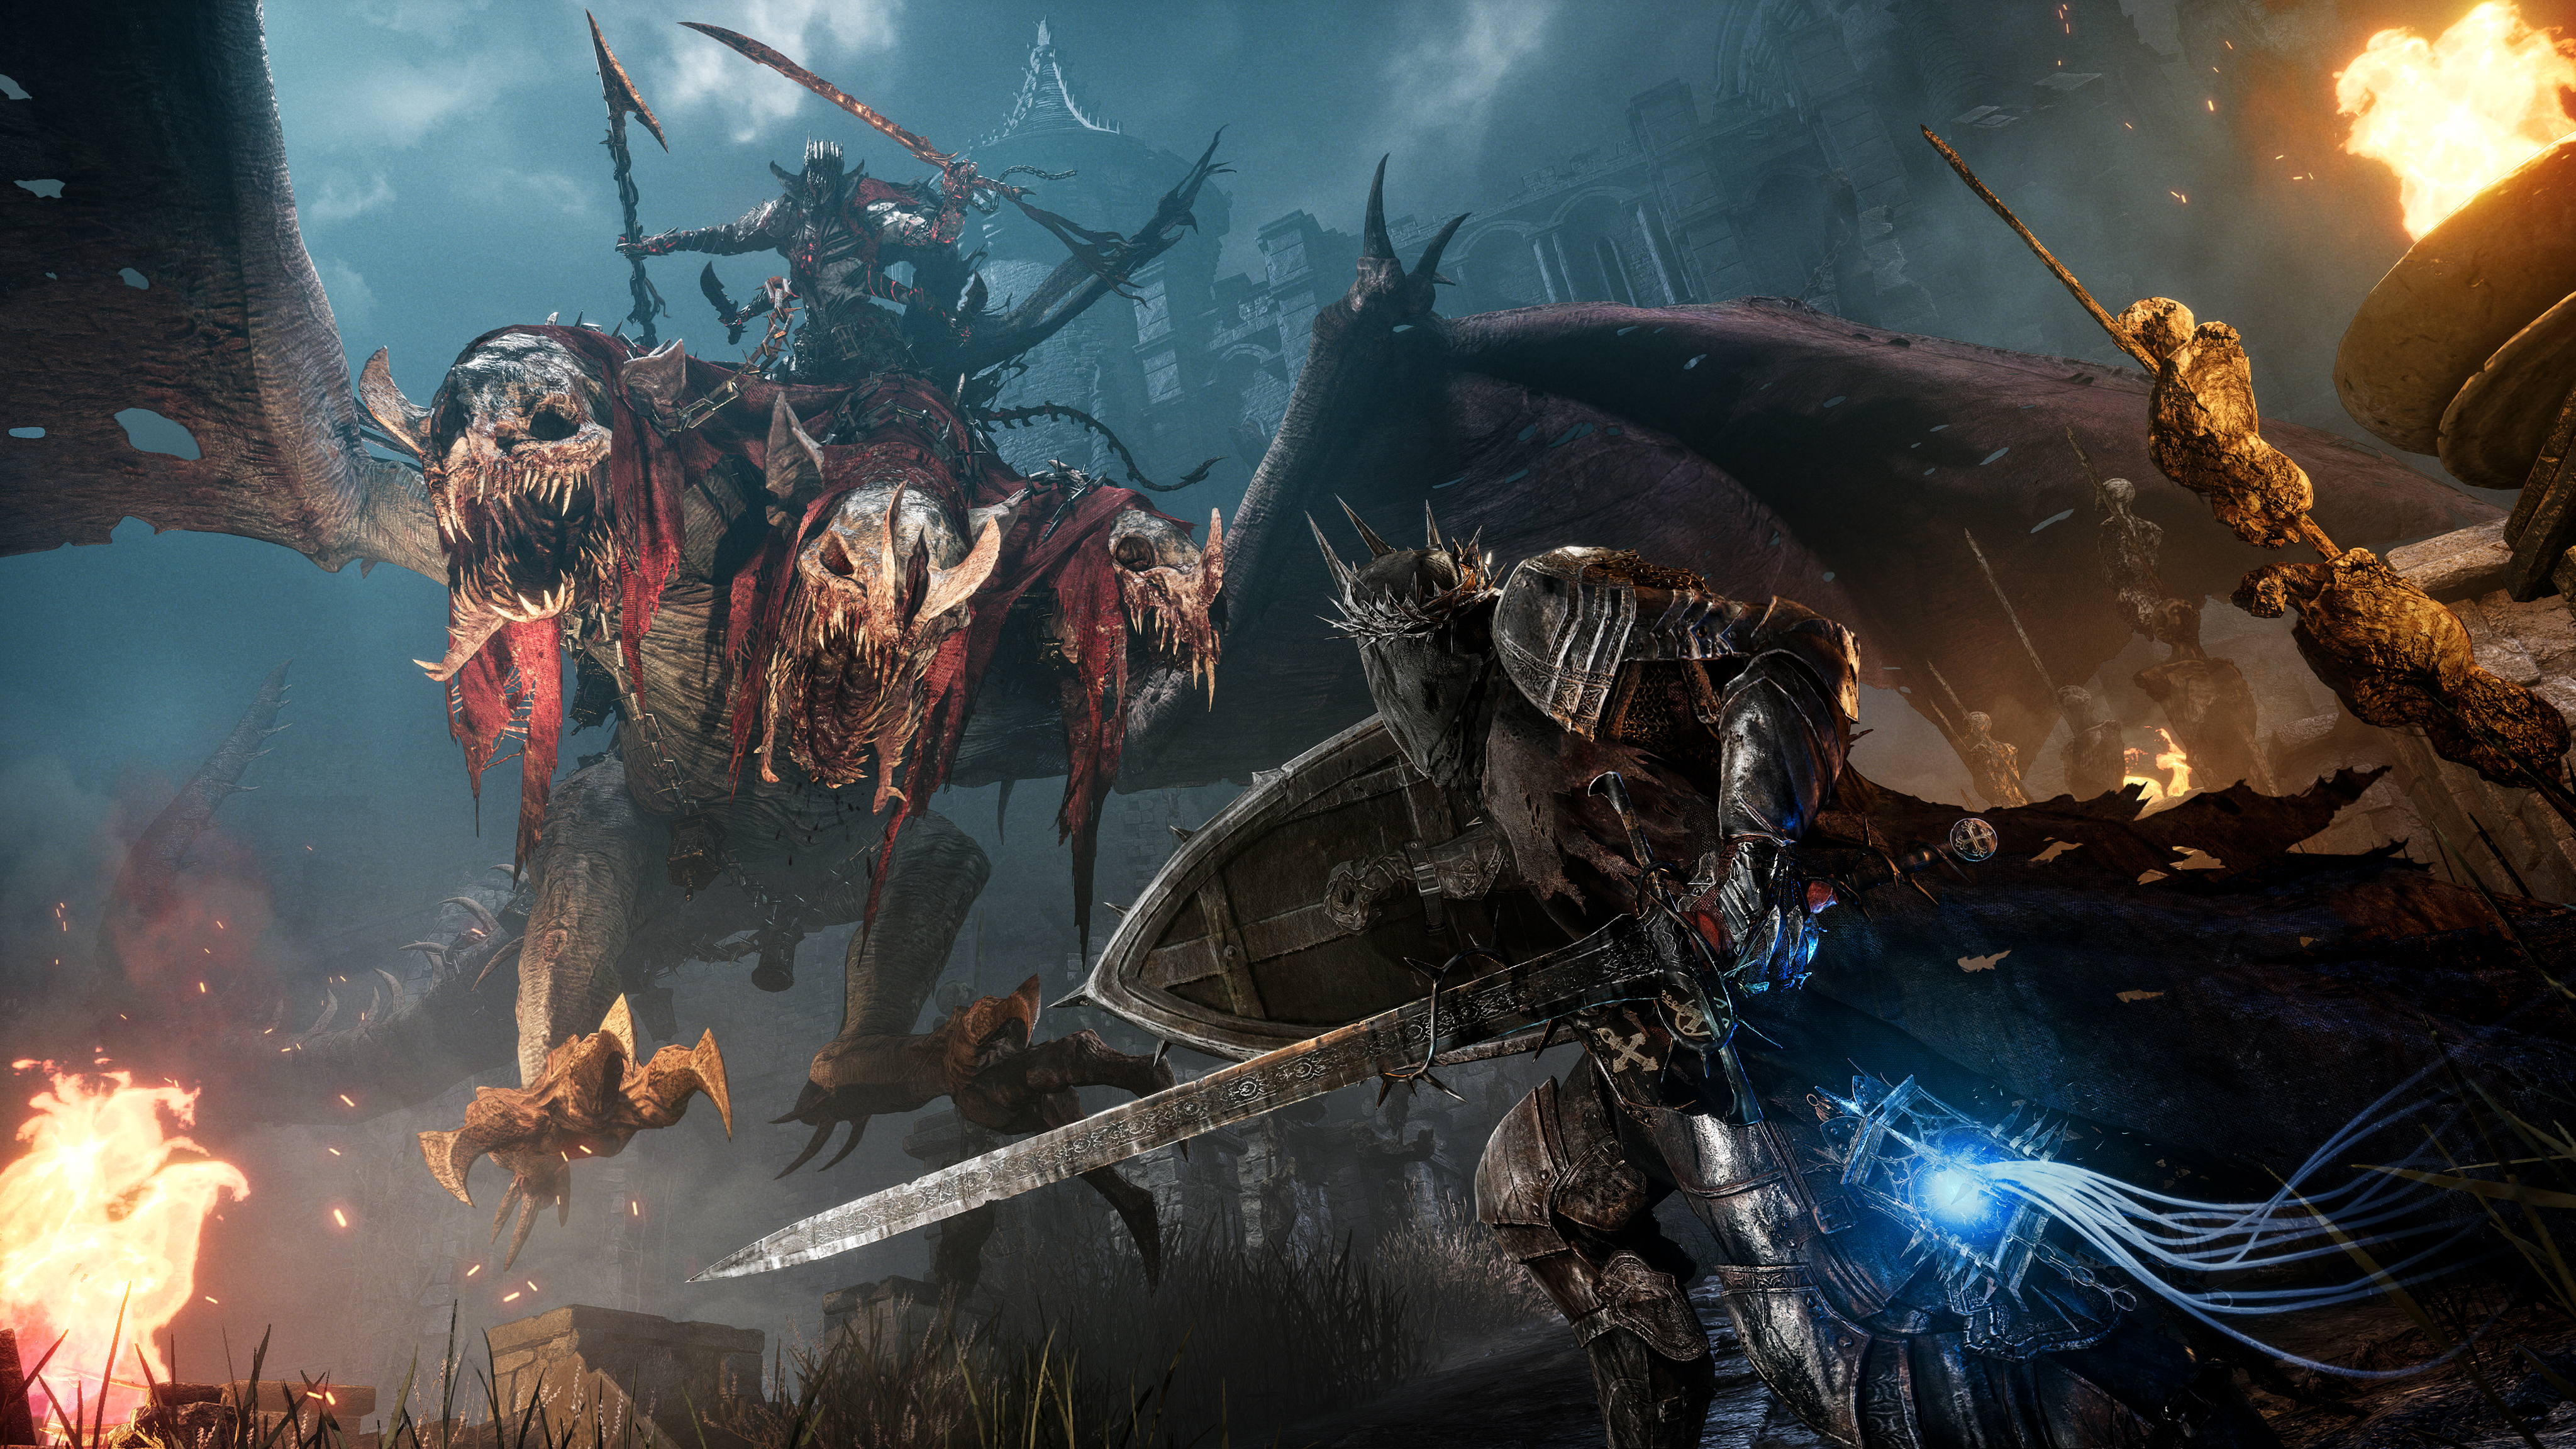 Lords of the Fallen Gets Gruesome Extended Gameplay Showcase